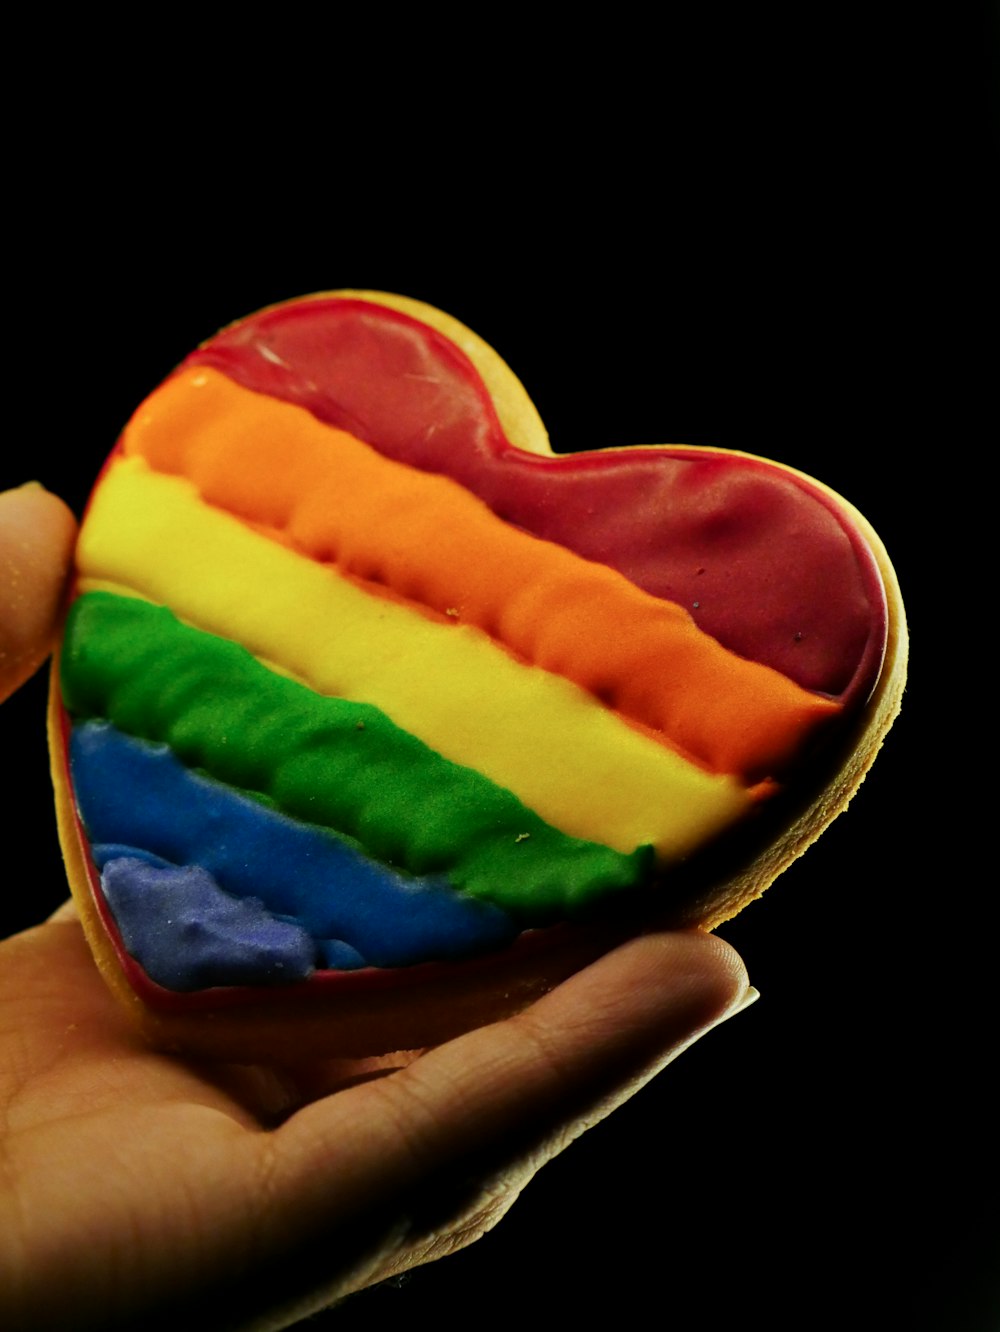 a rainbow heart shaped cookie being held by a hand